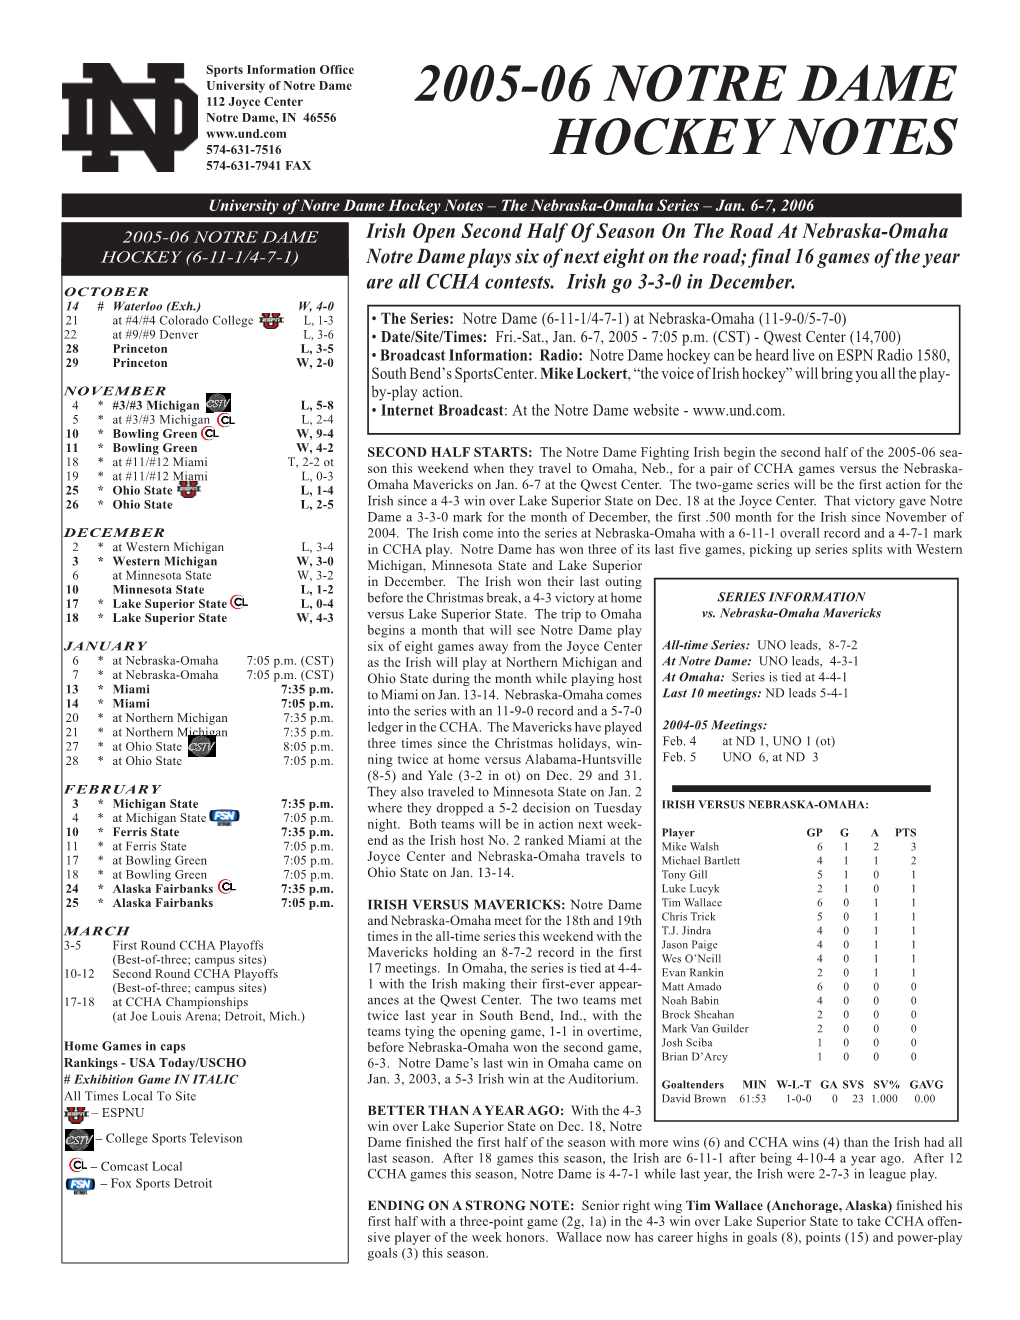 2005-06 Notre Dame Hockey Notes